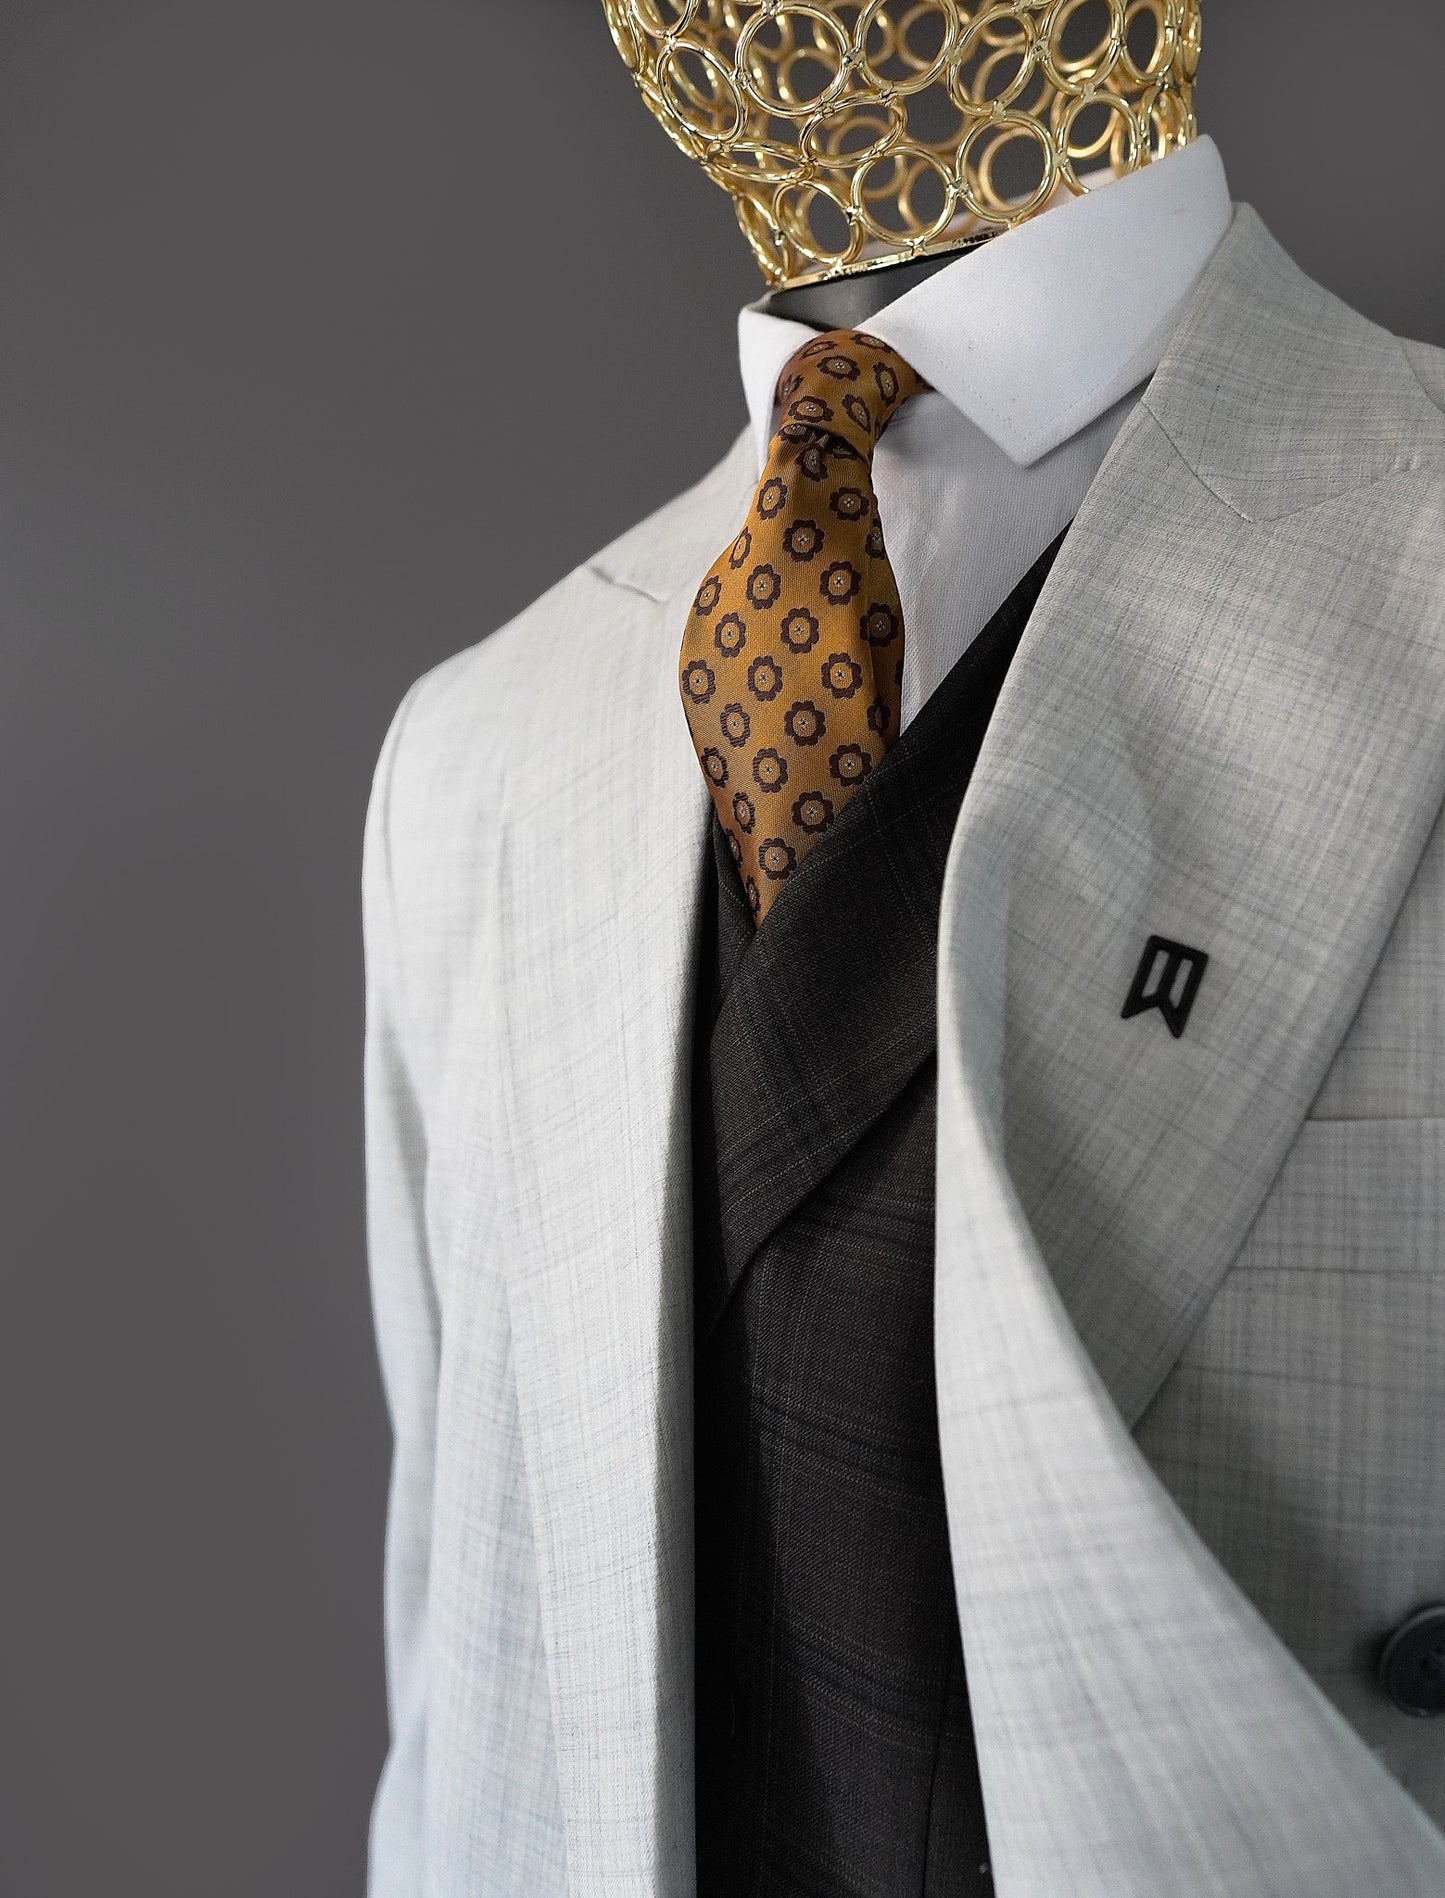 Beige Double Breasted Irish three Piece Suit